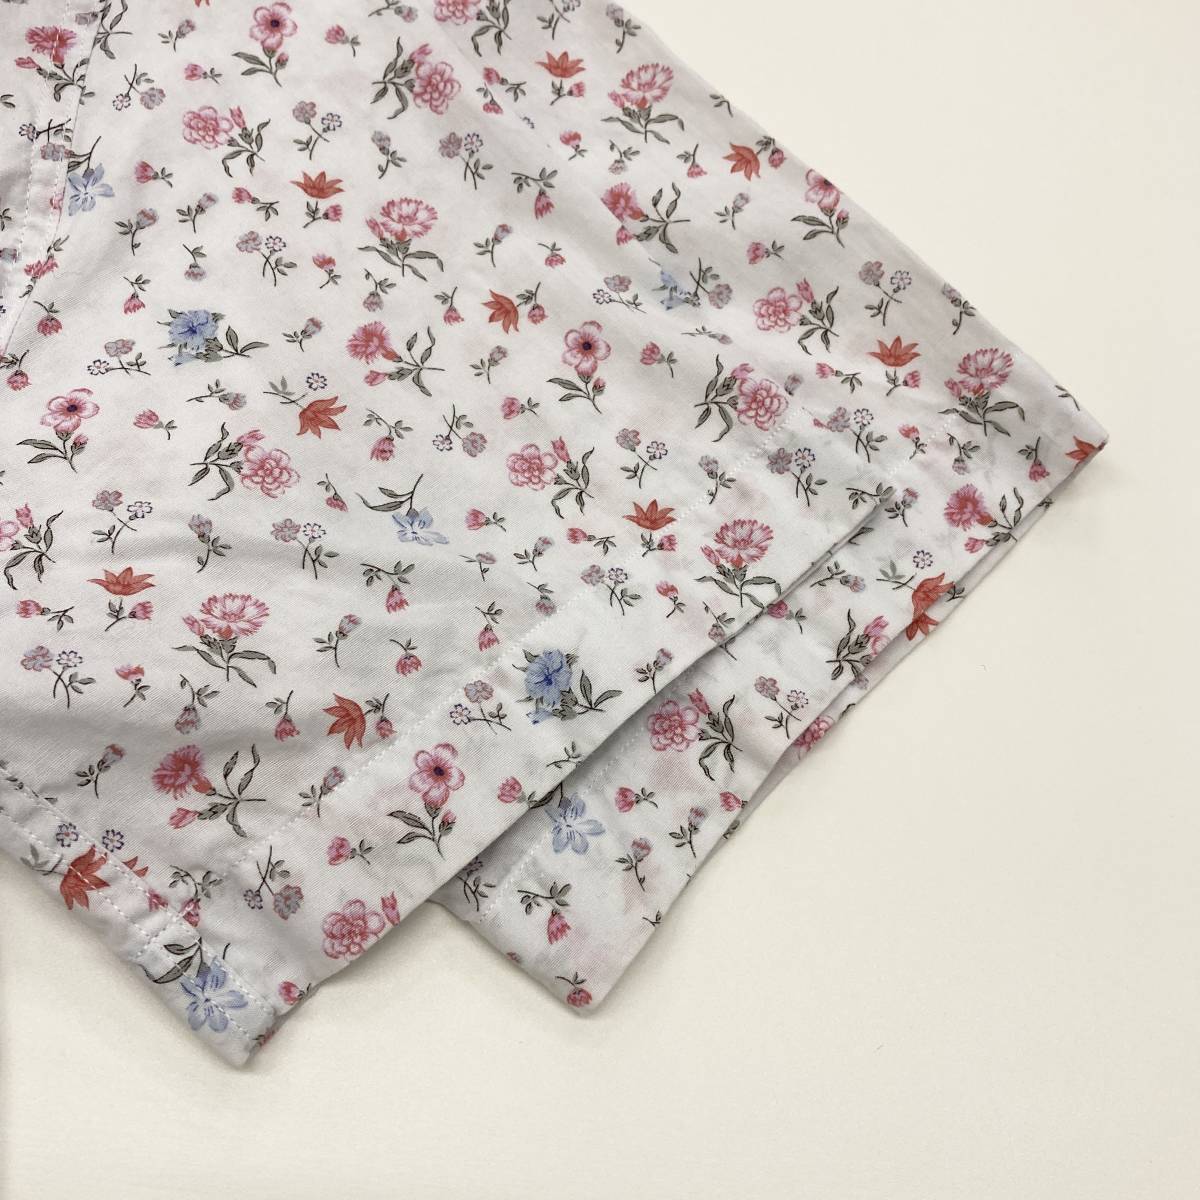 Paul Smith LONDON floral print short sleeves shirt made in Japan men's white M size PaulSmith Paul Smith London total pattern floral pattern shirt 3070175